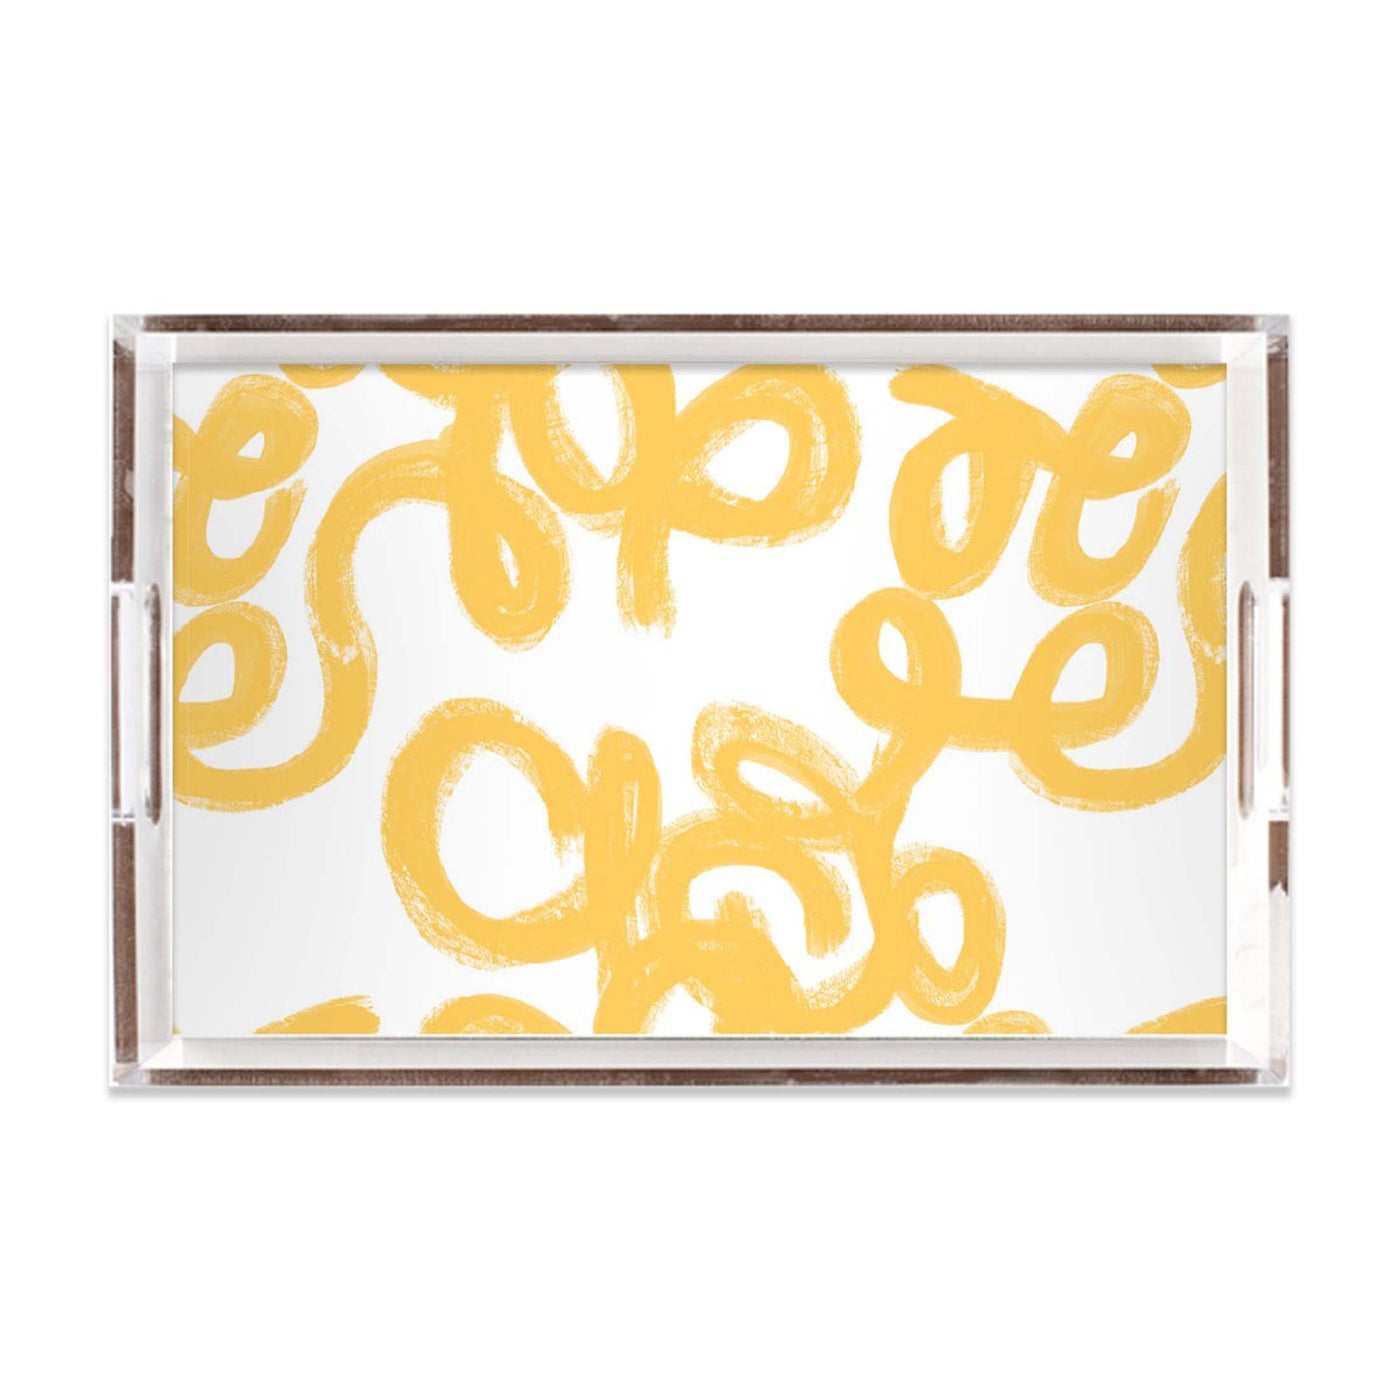 Penelope Lucite Tray Lucite Trays Yellow / 11x17 Katie Kime